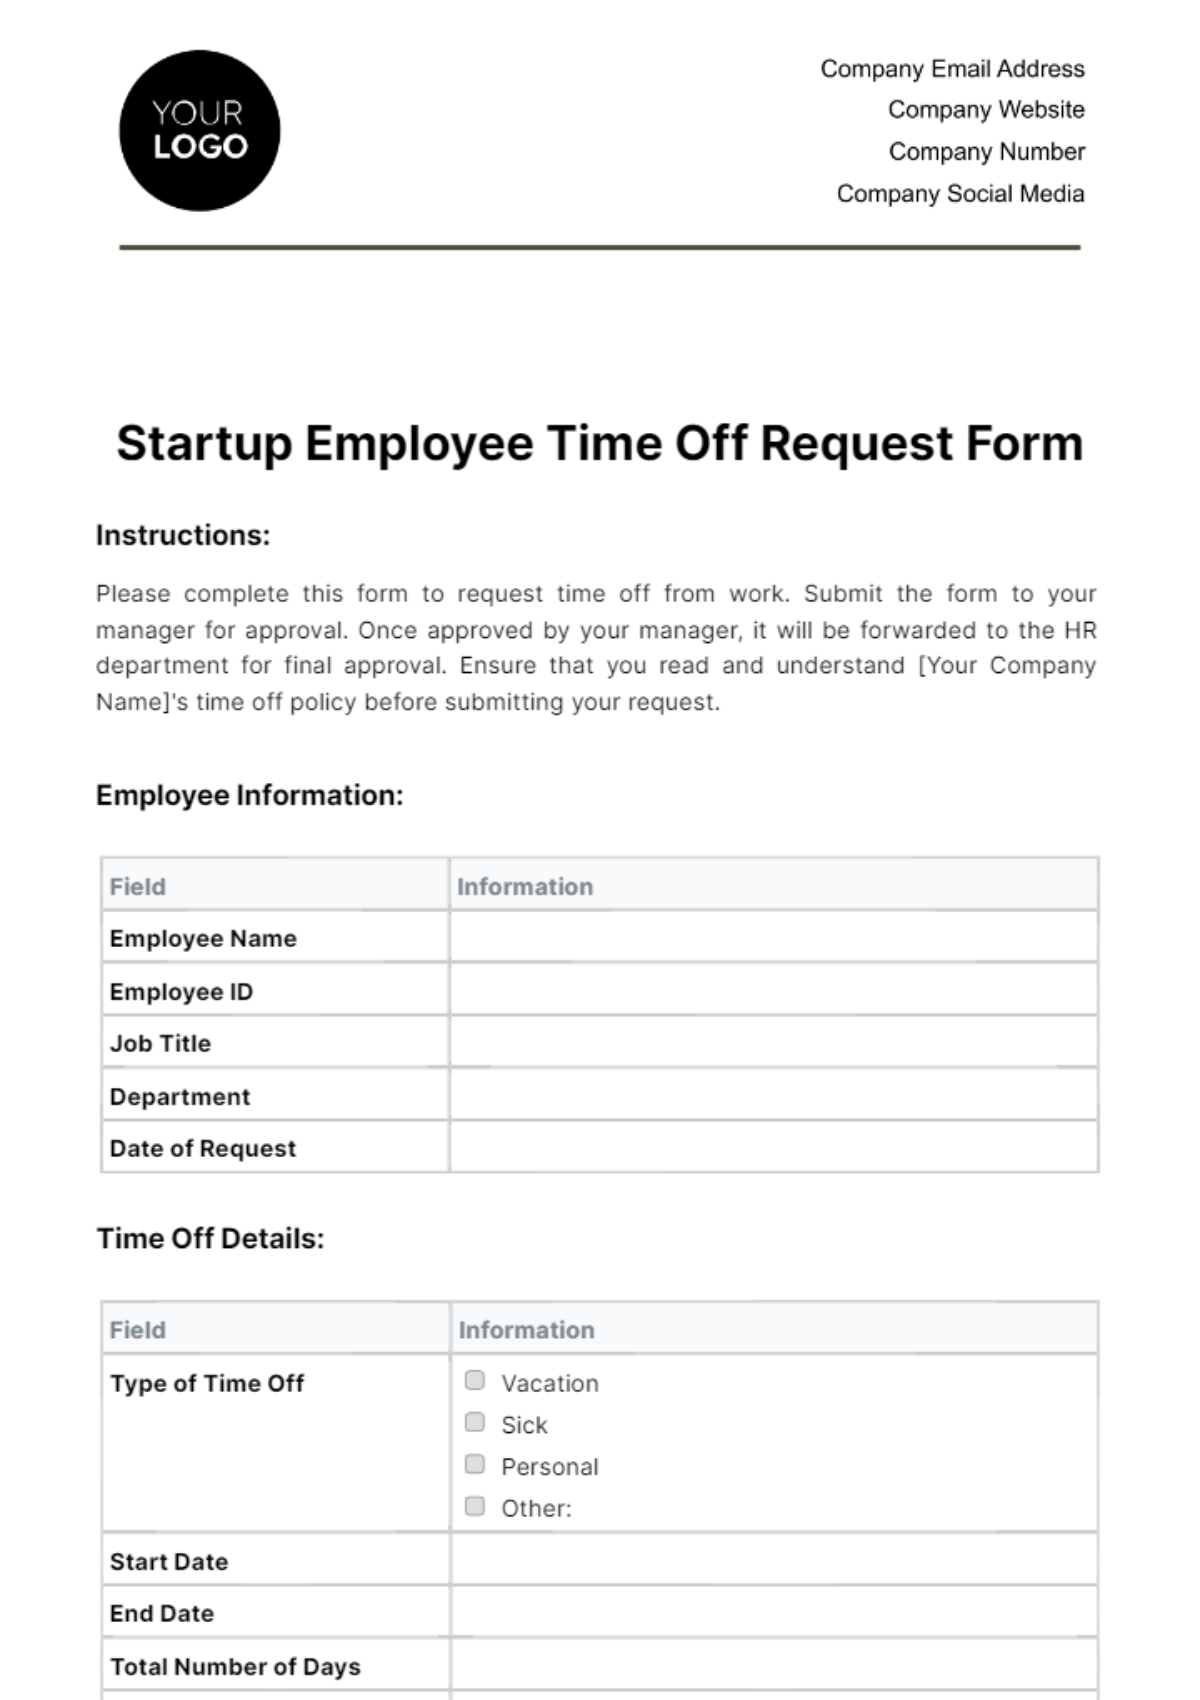 Free Startup Employee Time Off Request Form Template